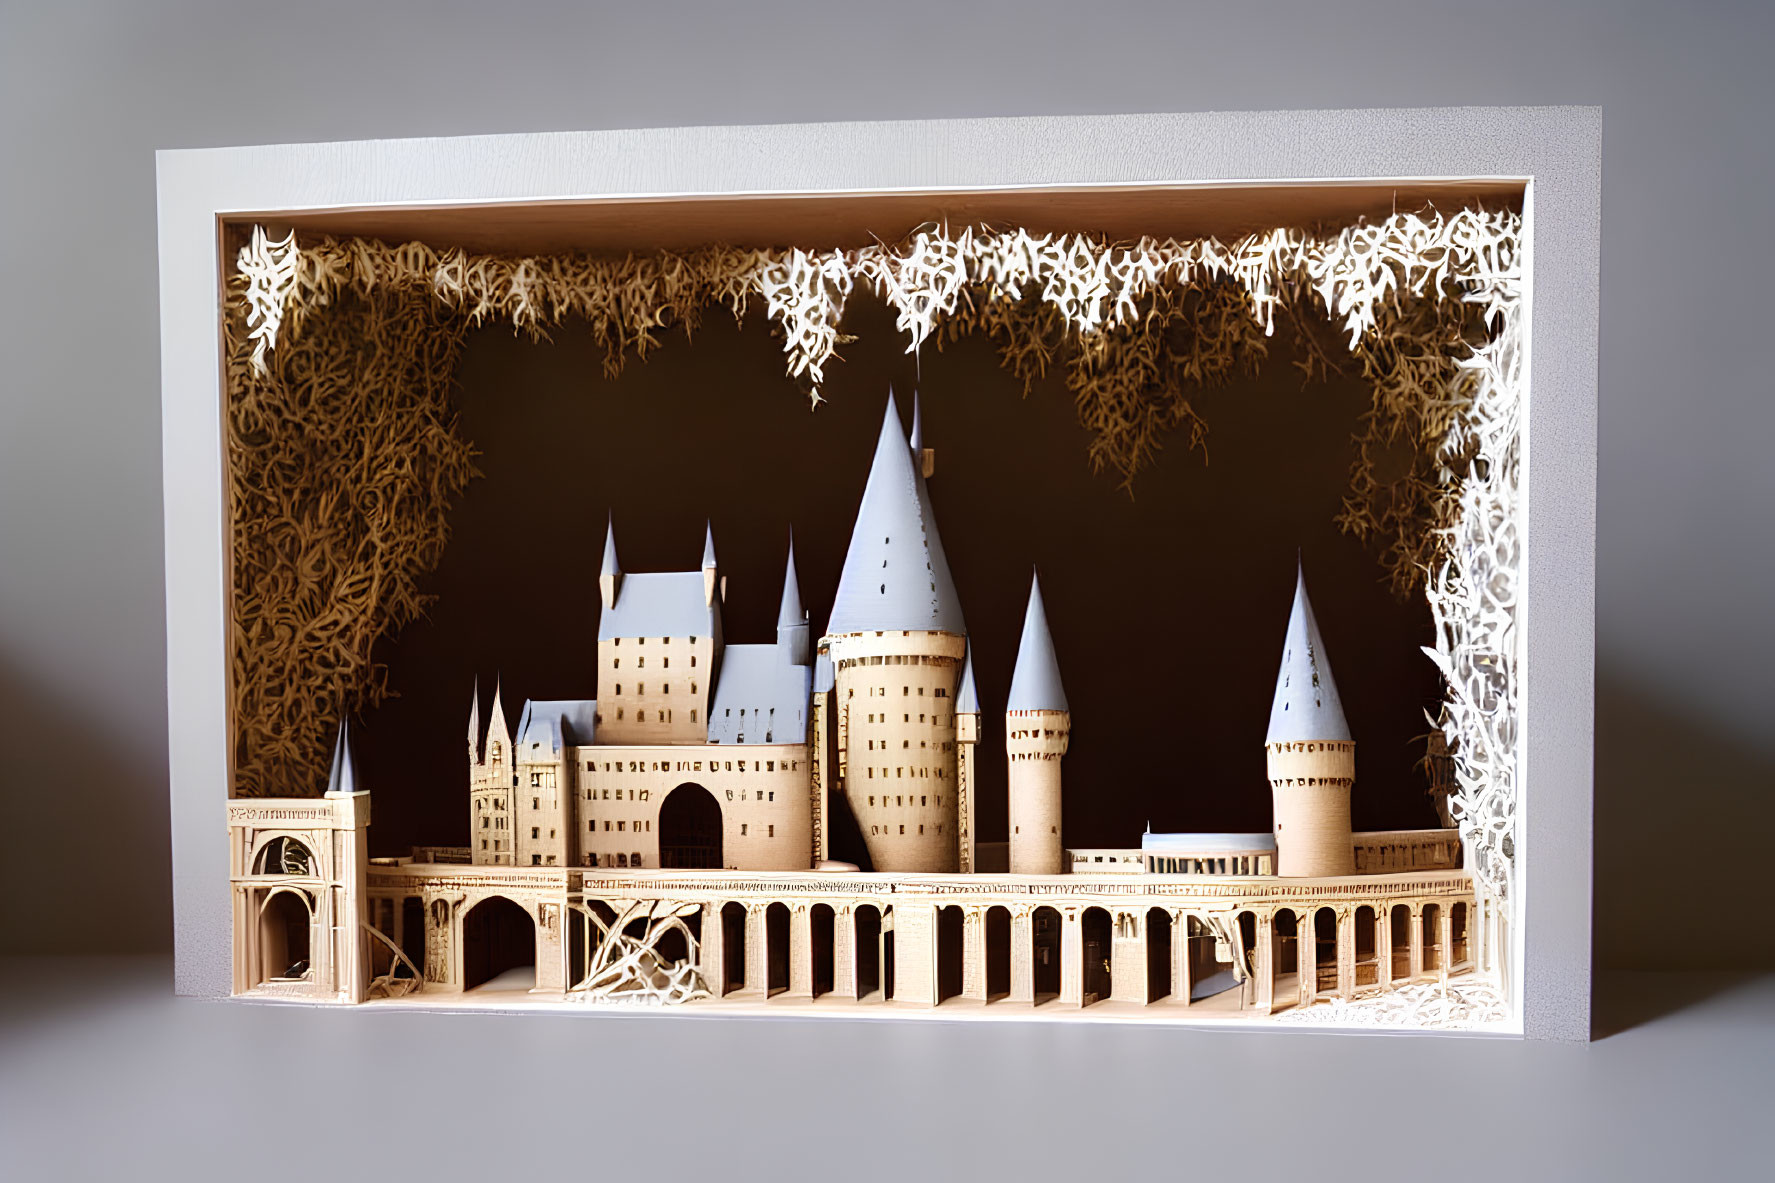 Detailed Paper Art of Castle with Towers and Archways in Shadow Box Display